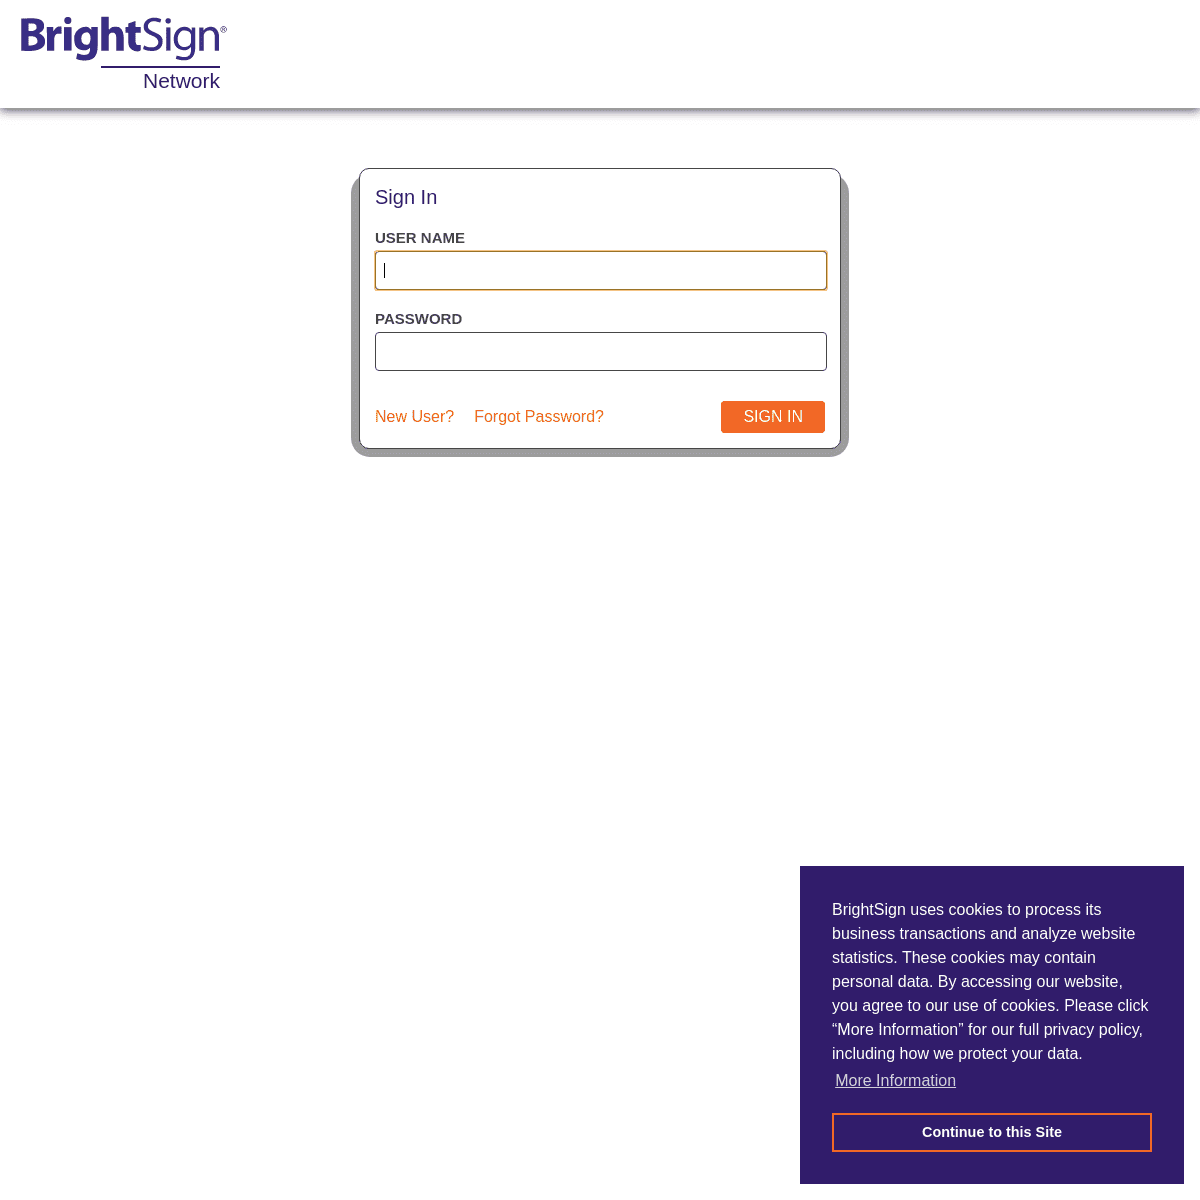 A complete backup of brightsignnetwork.com